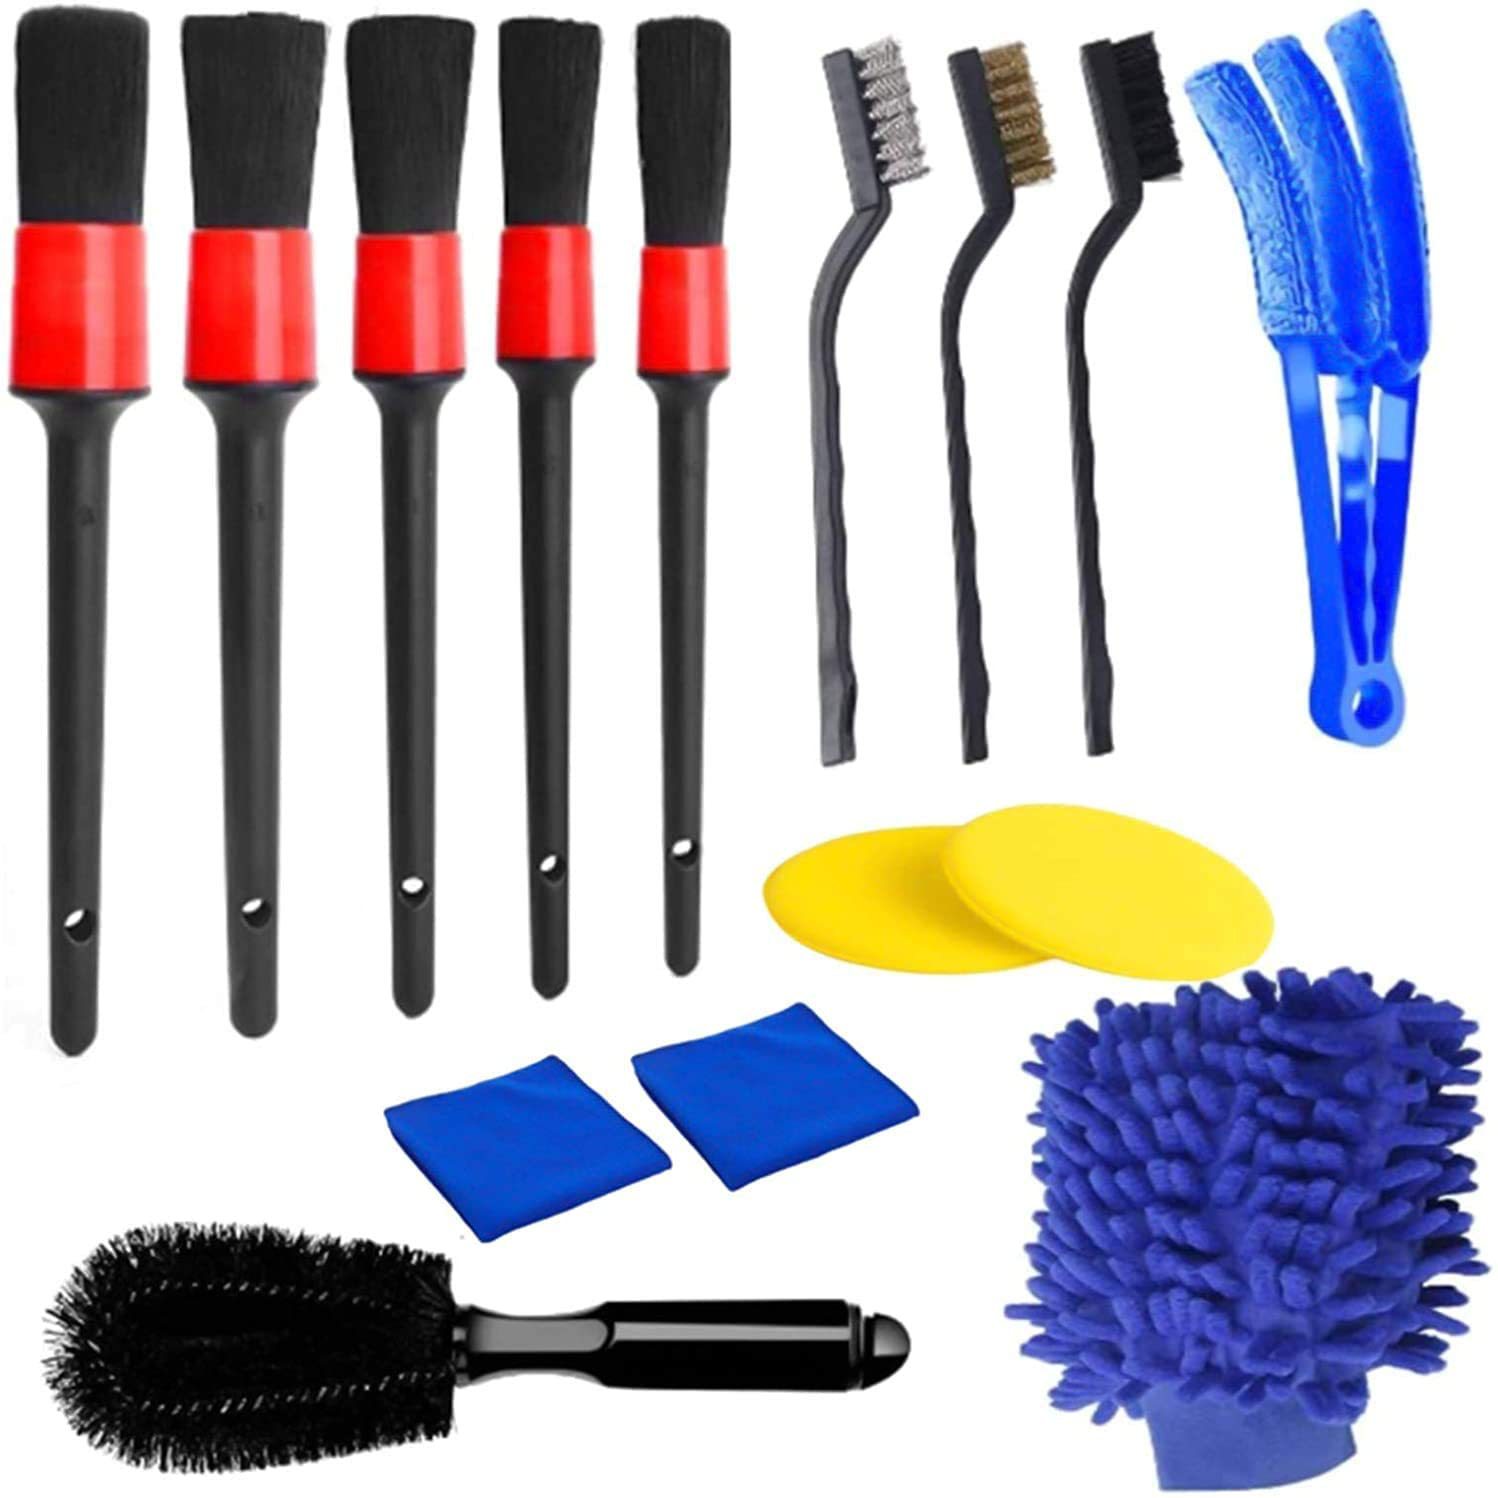 15Pcs Car Detailing Brushes Kit Auto Detailing Brushes Set For Interior Exterior Leather Air Vents Engine Dashboard